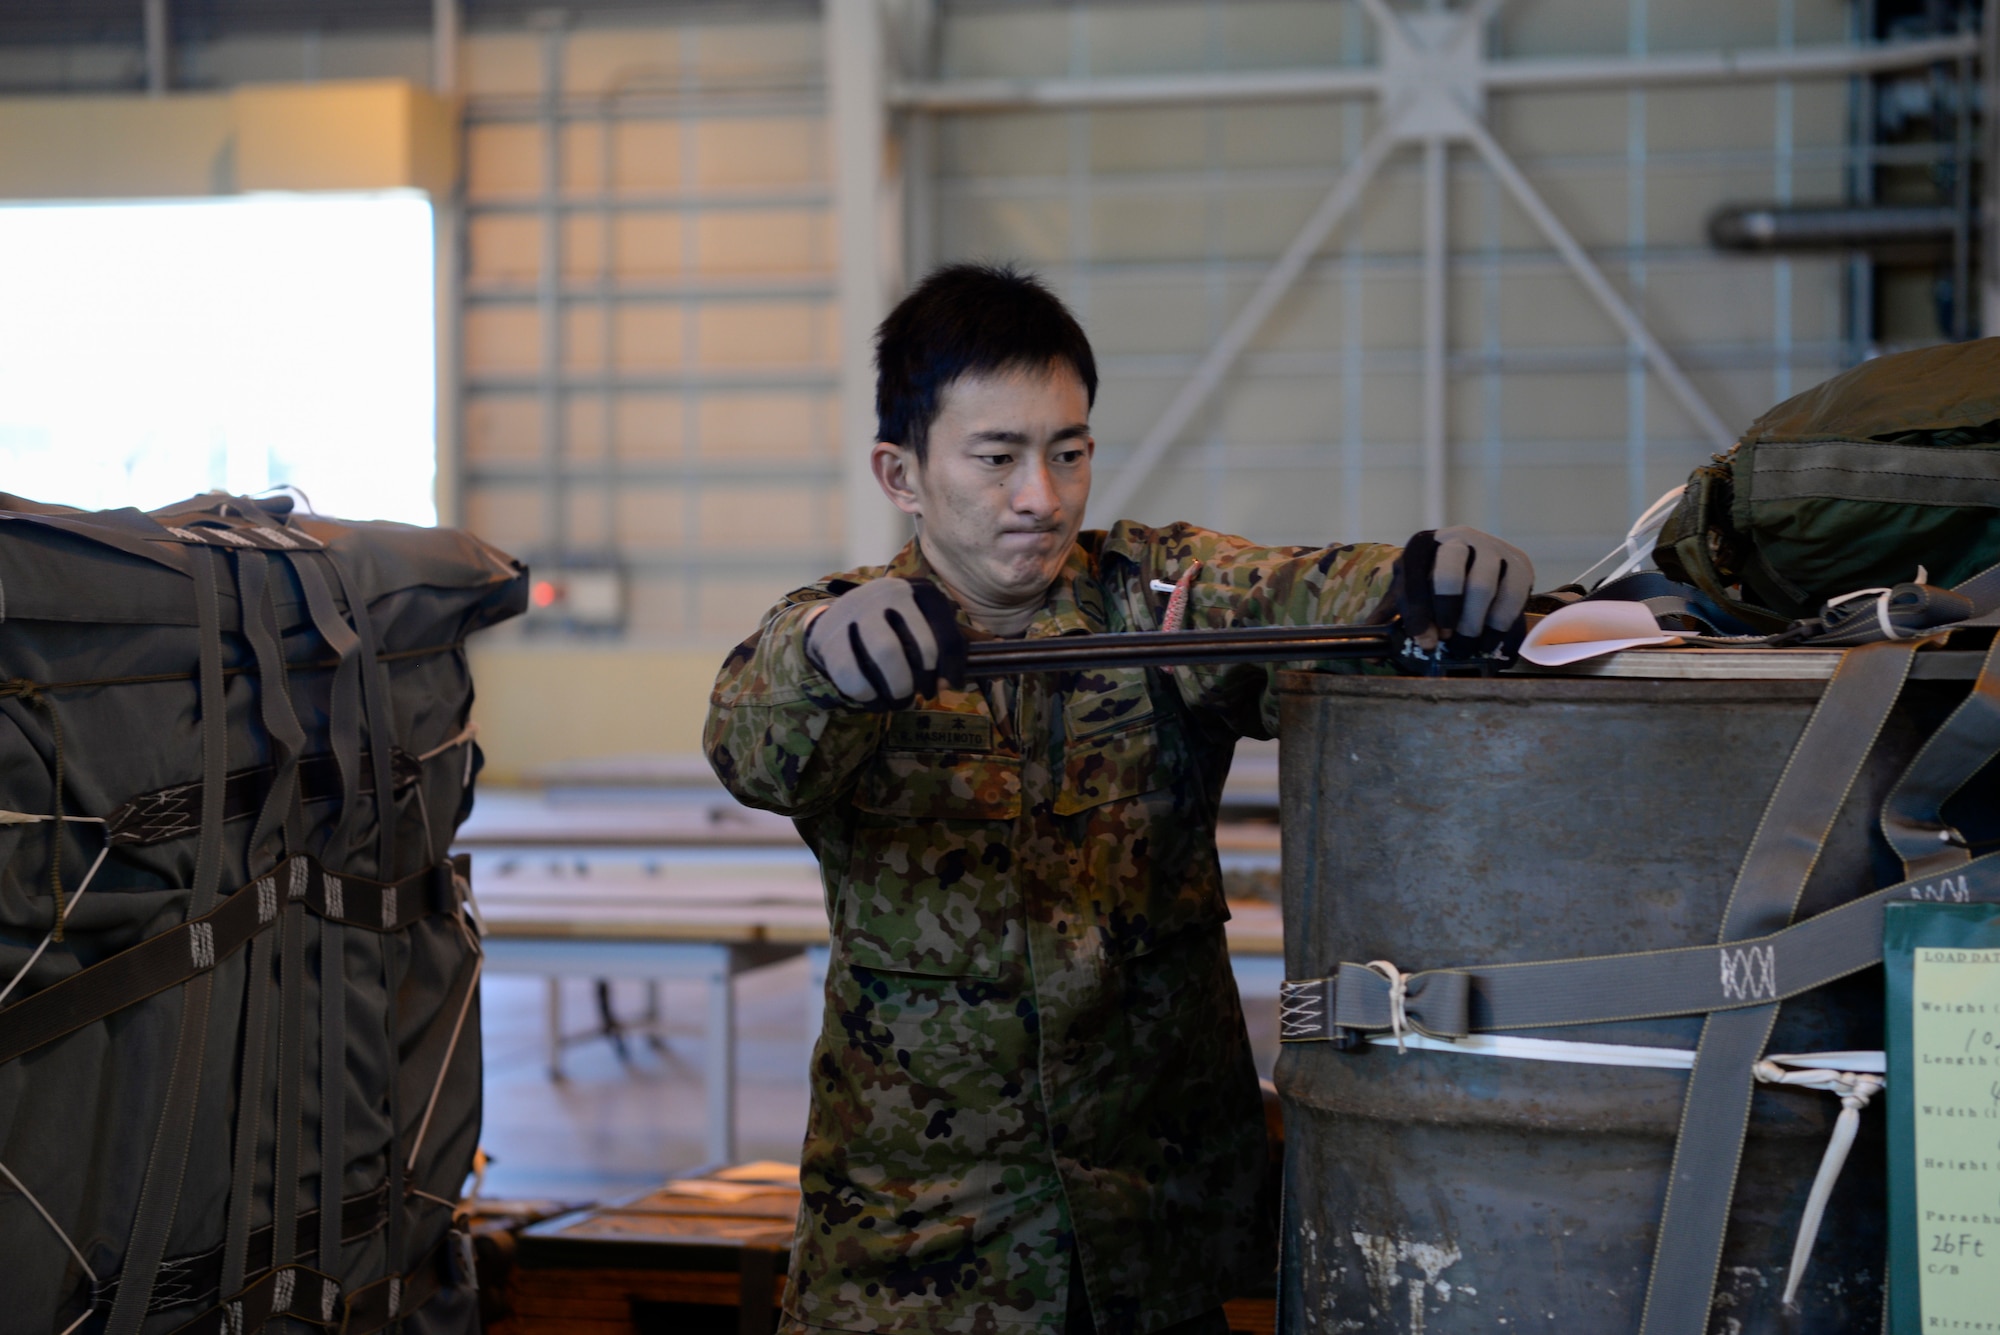 A Japan Ground Self-Defense Force soldier assigned to the 1st Airborne Brigade performs supply bundle checks, at Yokota Air Base, Japan, Nov. 2, 2018, during Keen Sword 19.